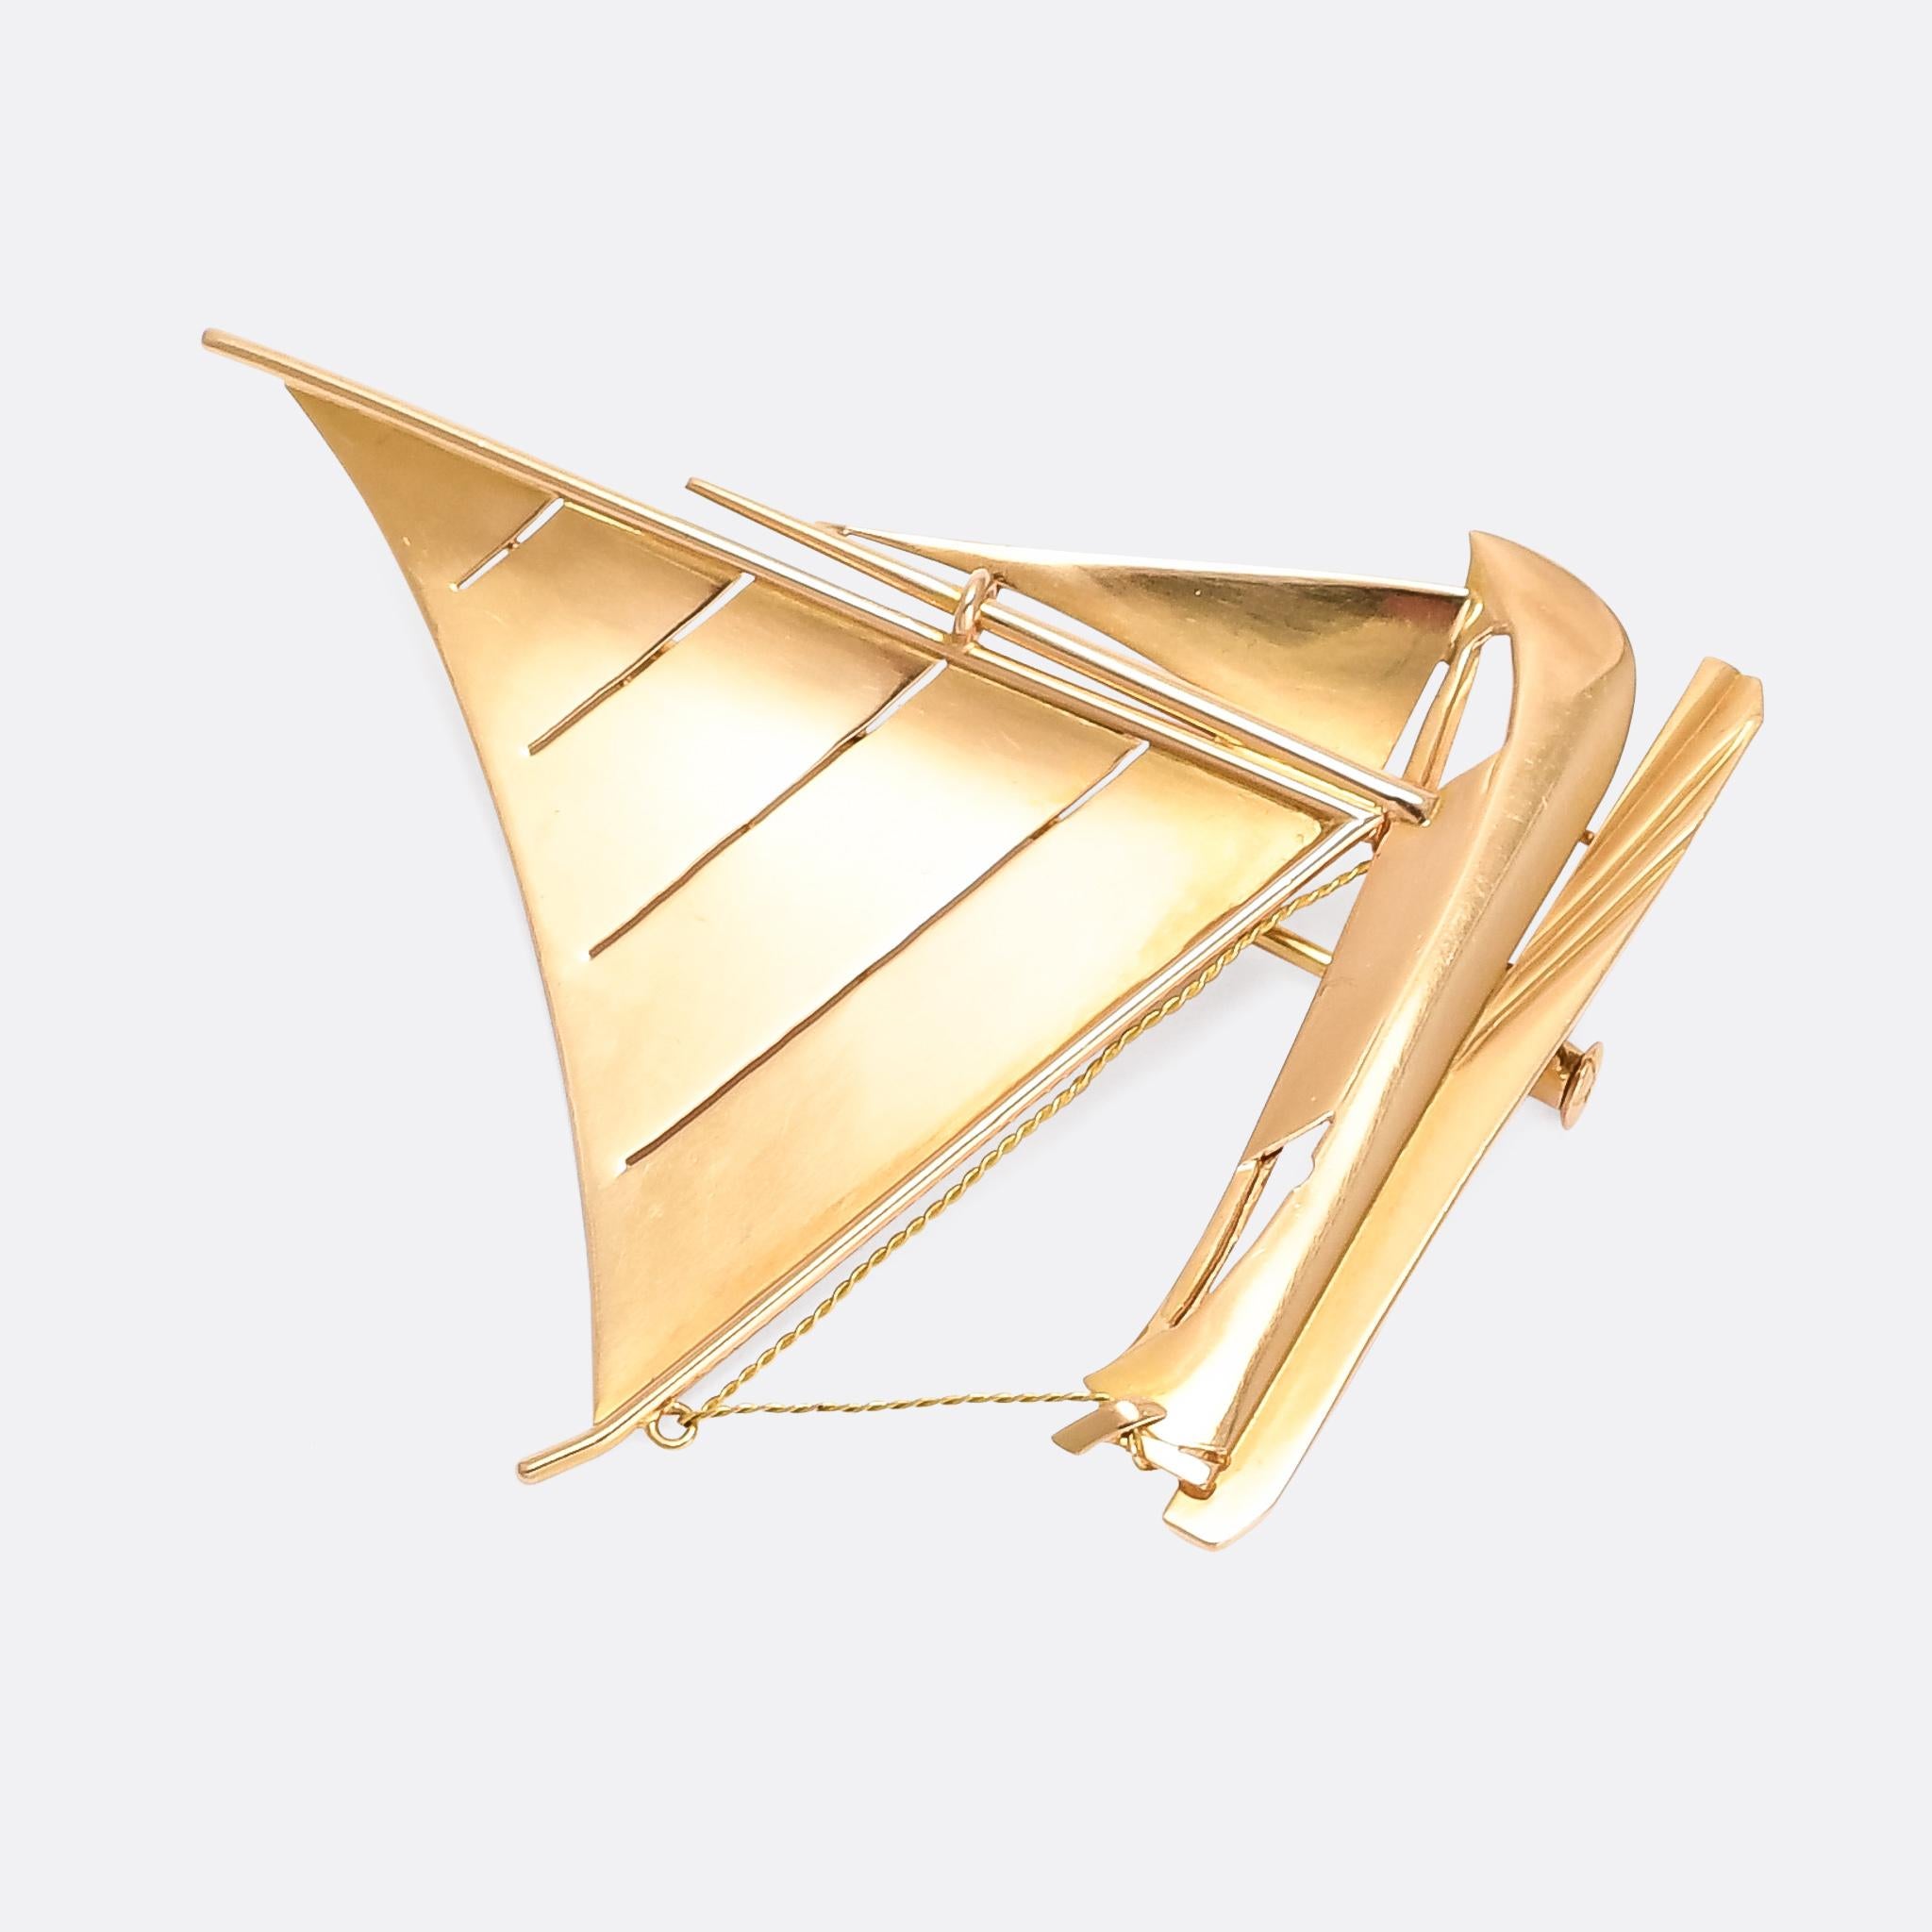 An exquisite Art Deco period sailboat brooch in 18 karat gold. It was made in France in the 1930s, and the design is impeccable: effortlessly elegant with hints of Deco styling and giving a strong impression of motion. The quality is exceptional,